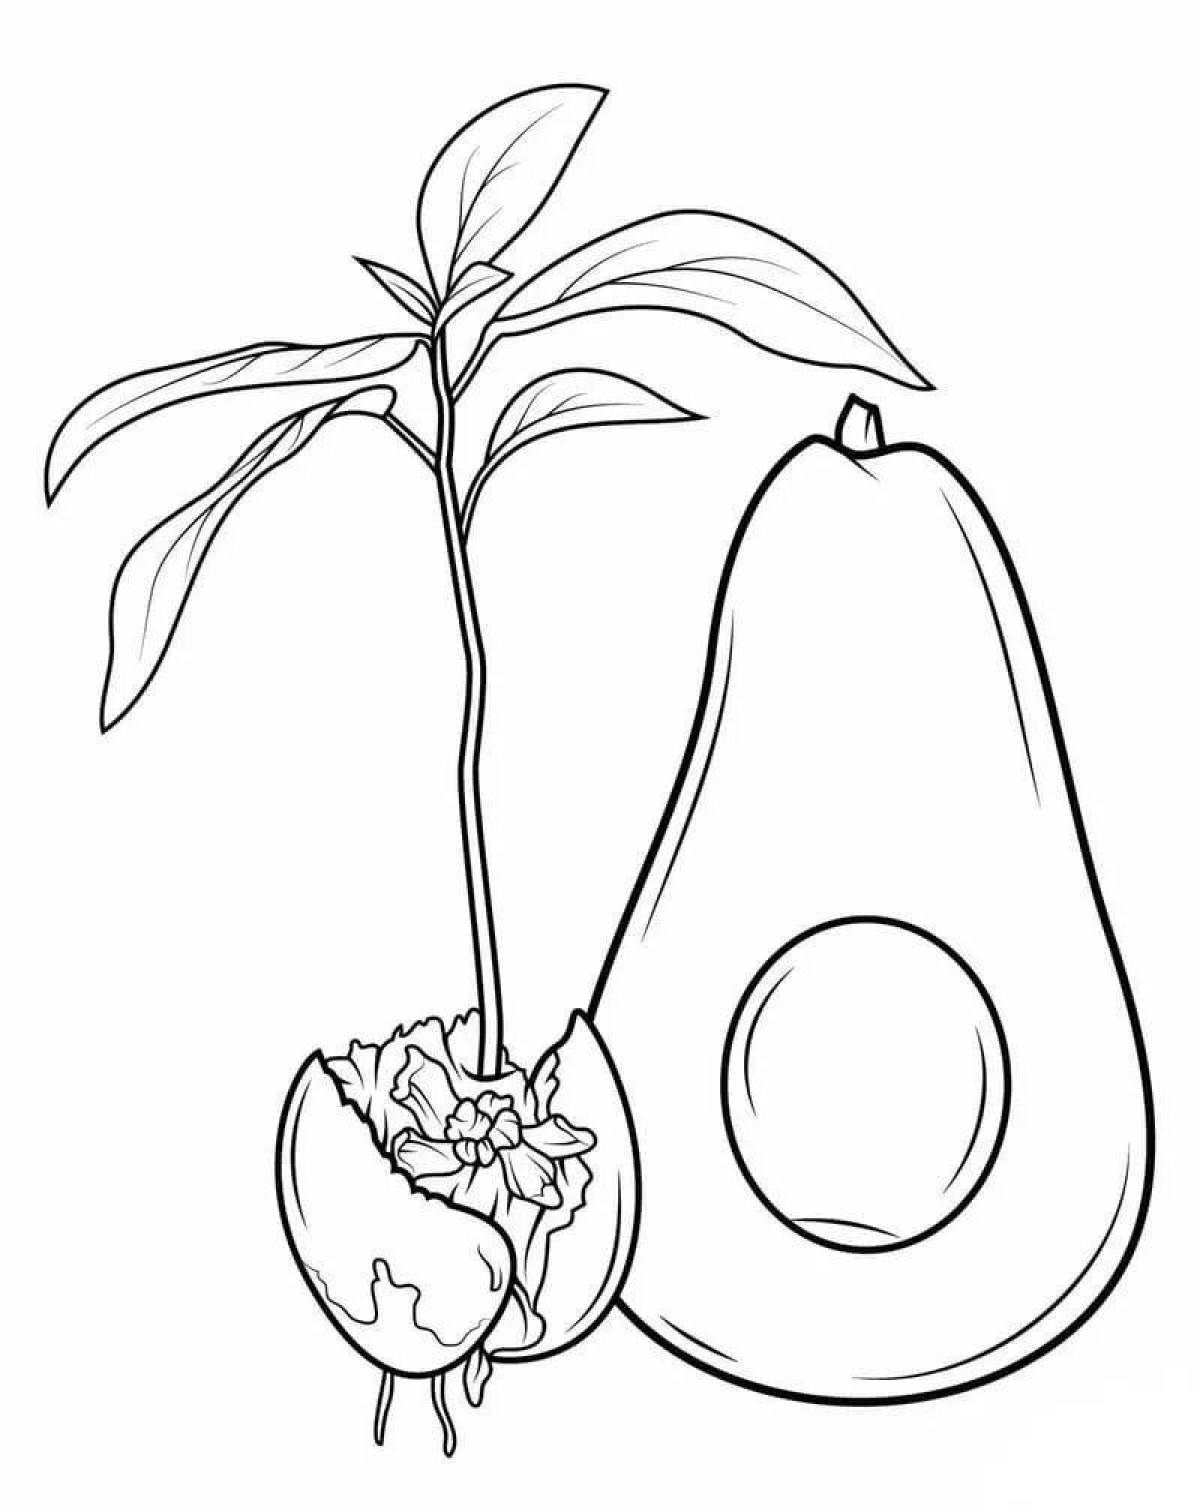 Innovative avocado coloring book for 6-7 year olds